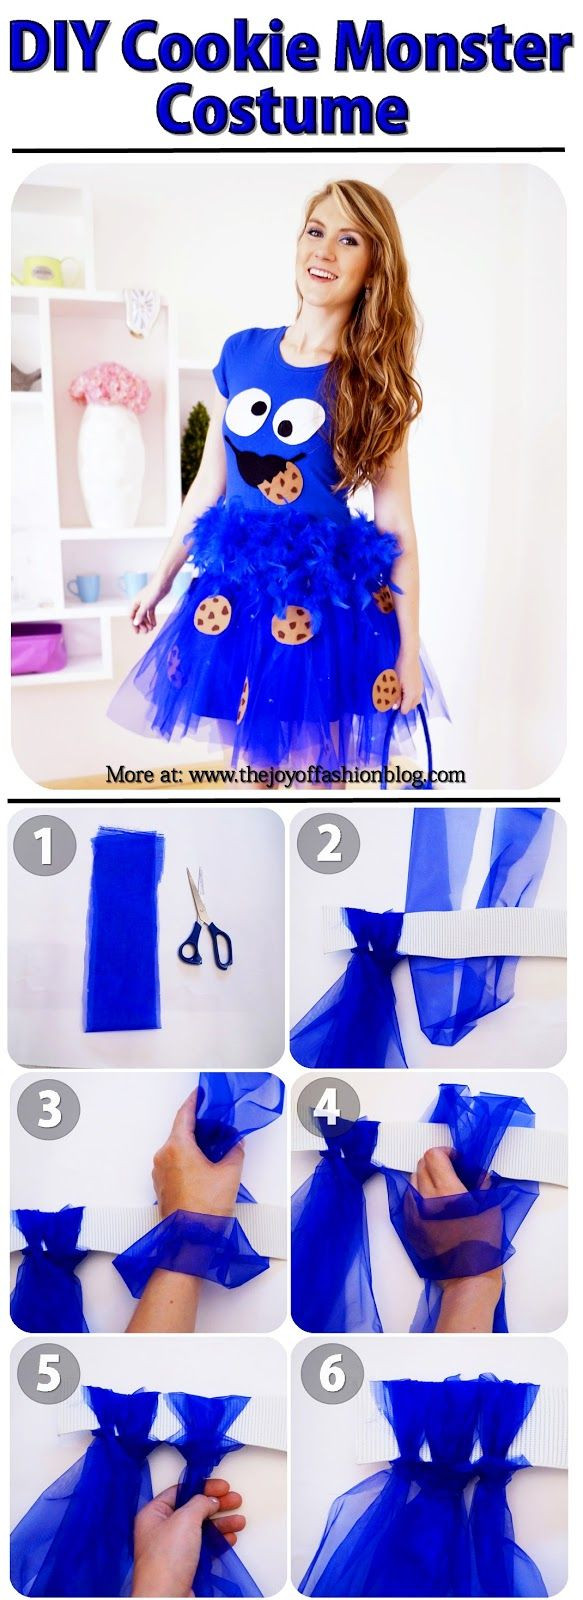 DIY Cookie Monster Costume
 Cookie Monster Costume Tutorial Instructions on the